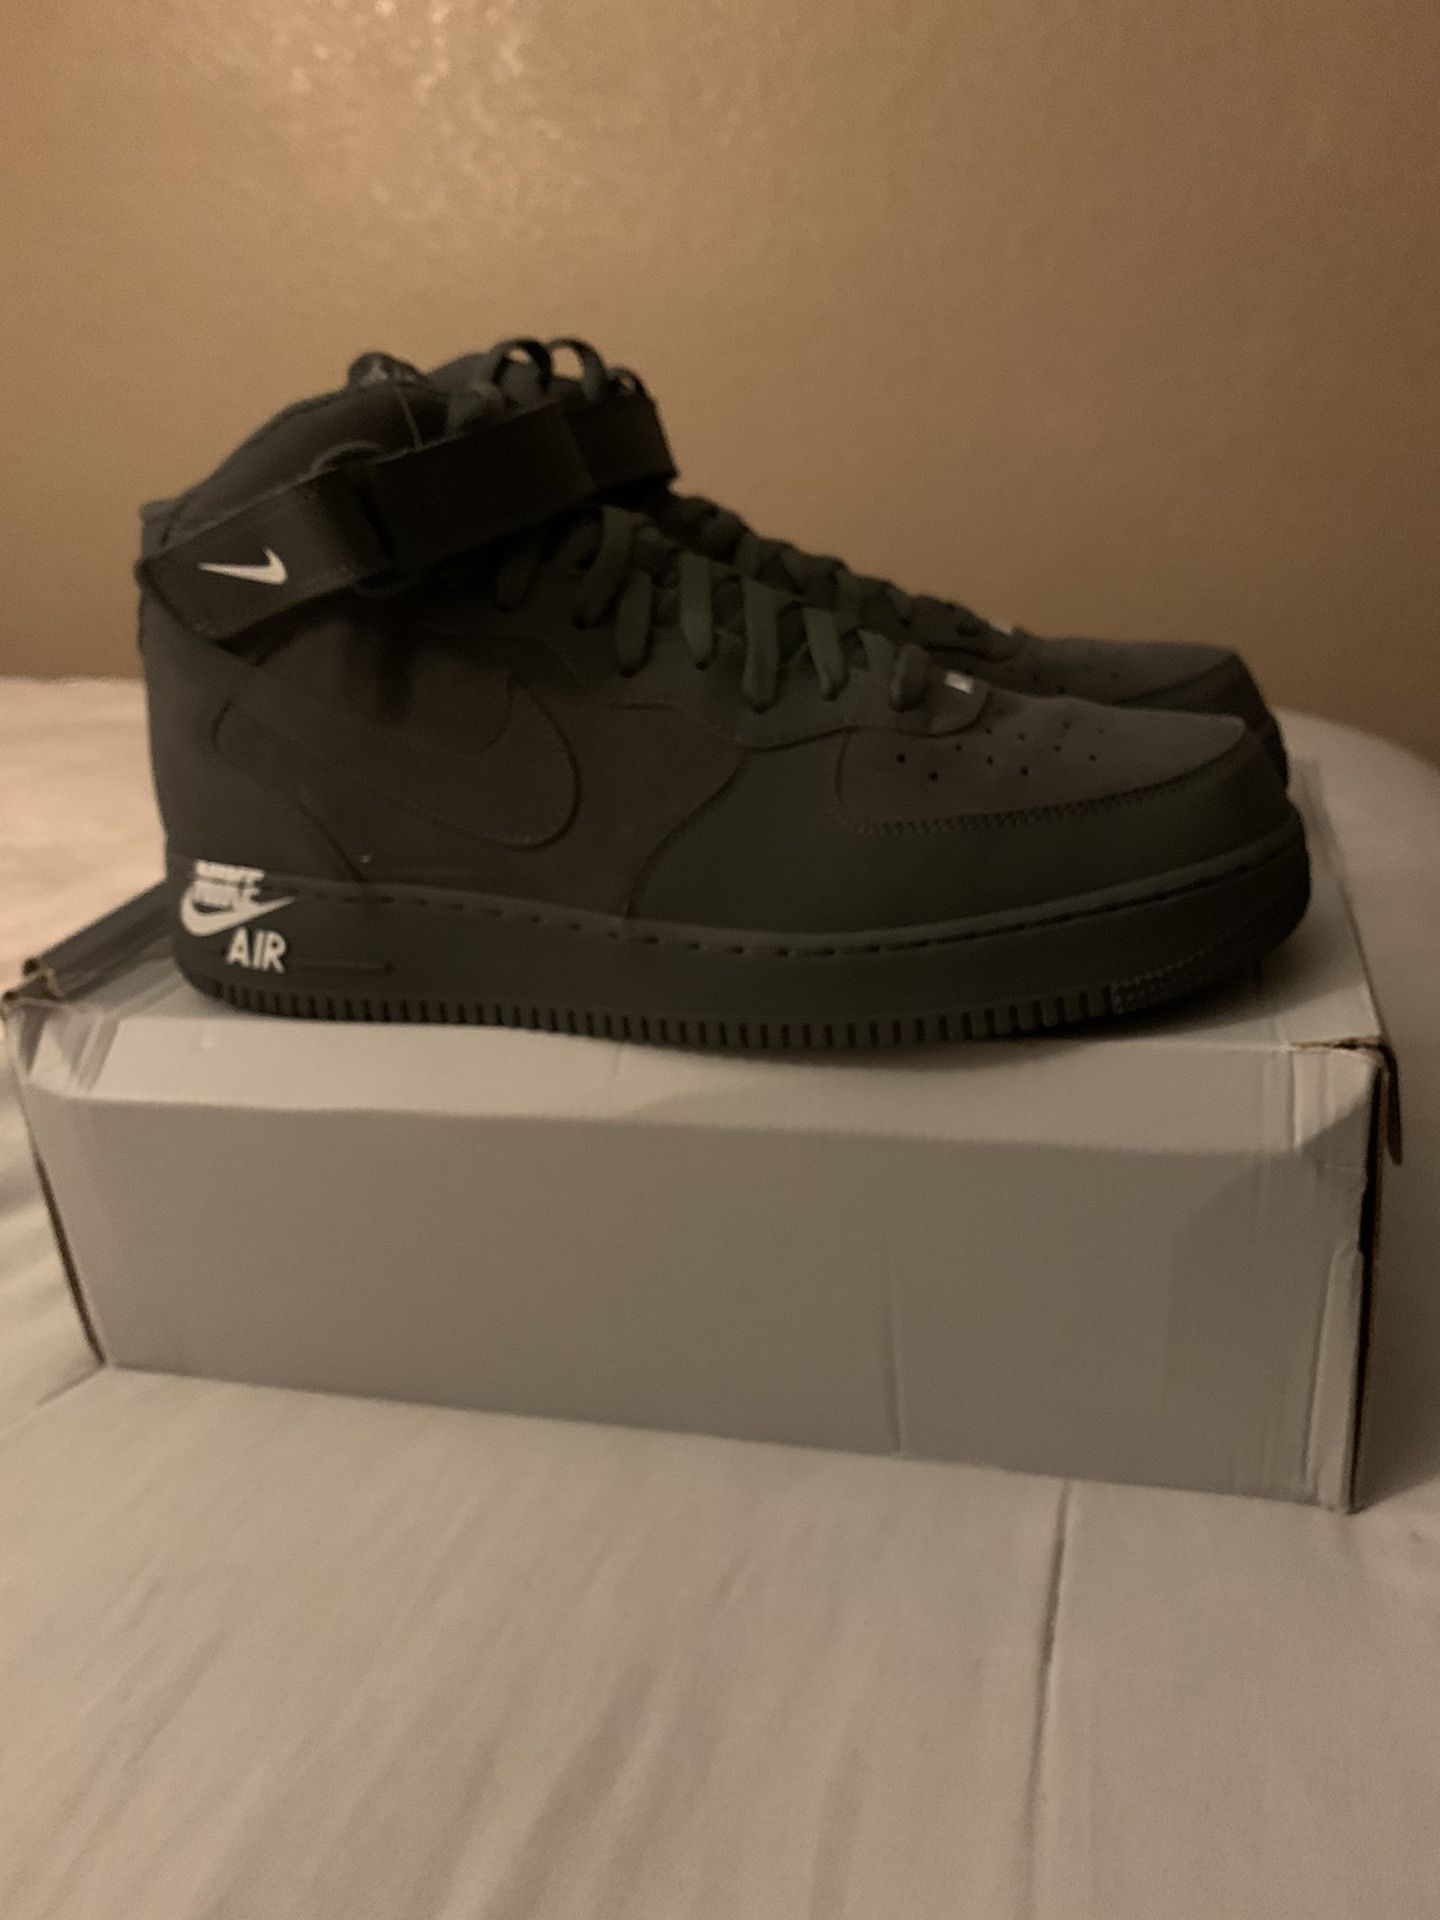 Nike shoes. Air Force 1 Mid. Men’s size 13